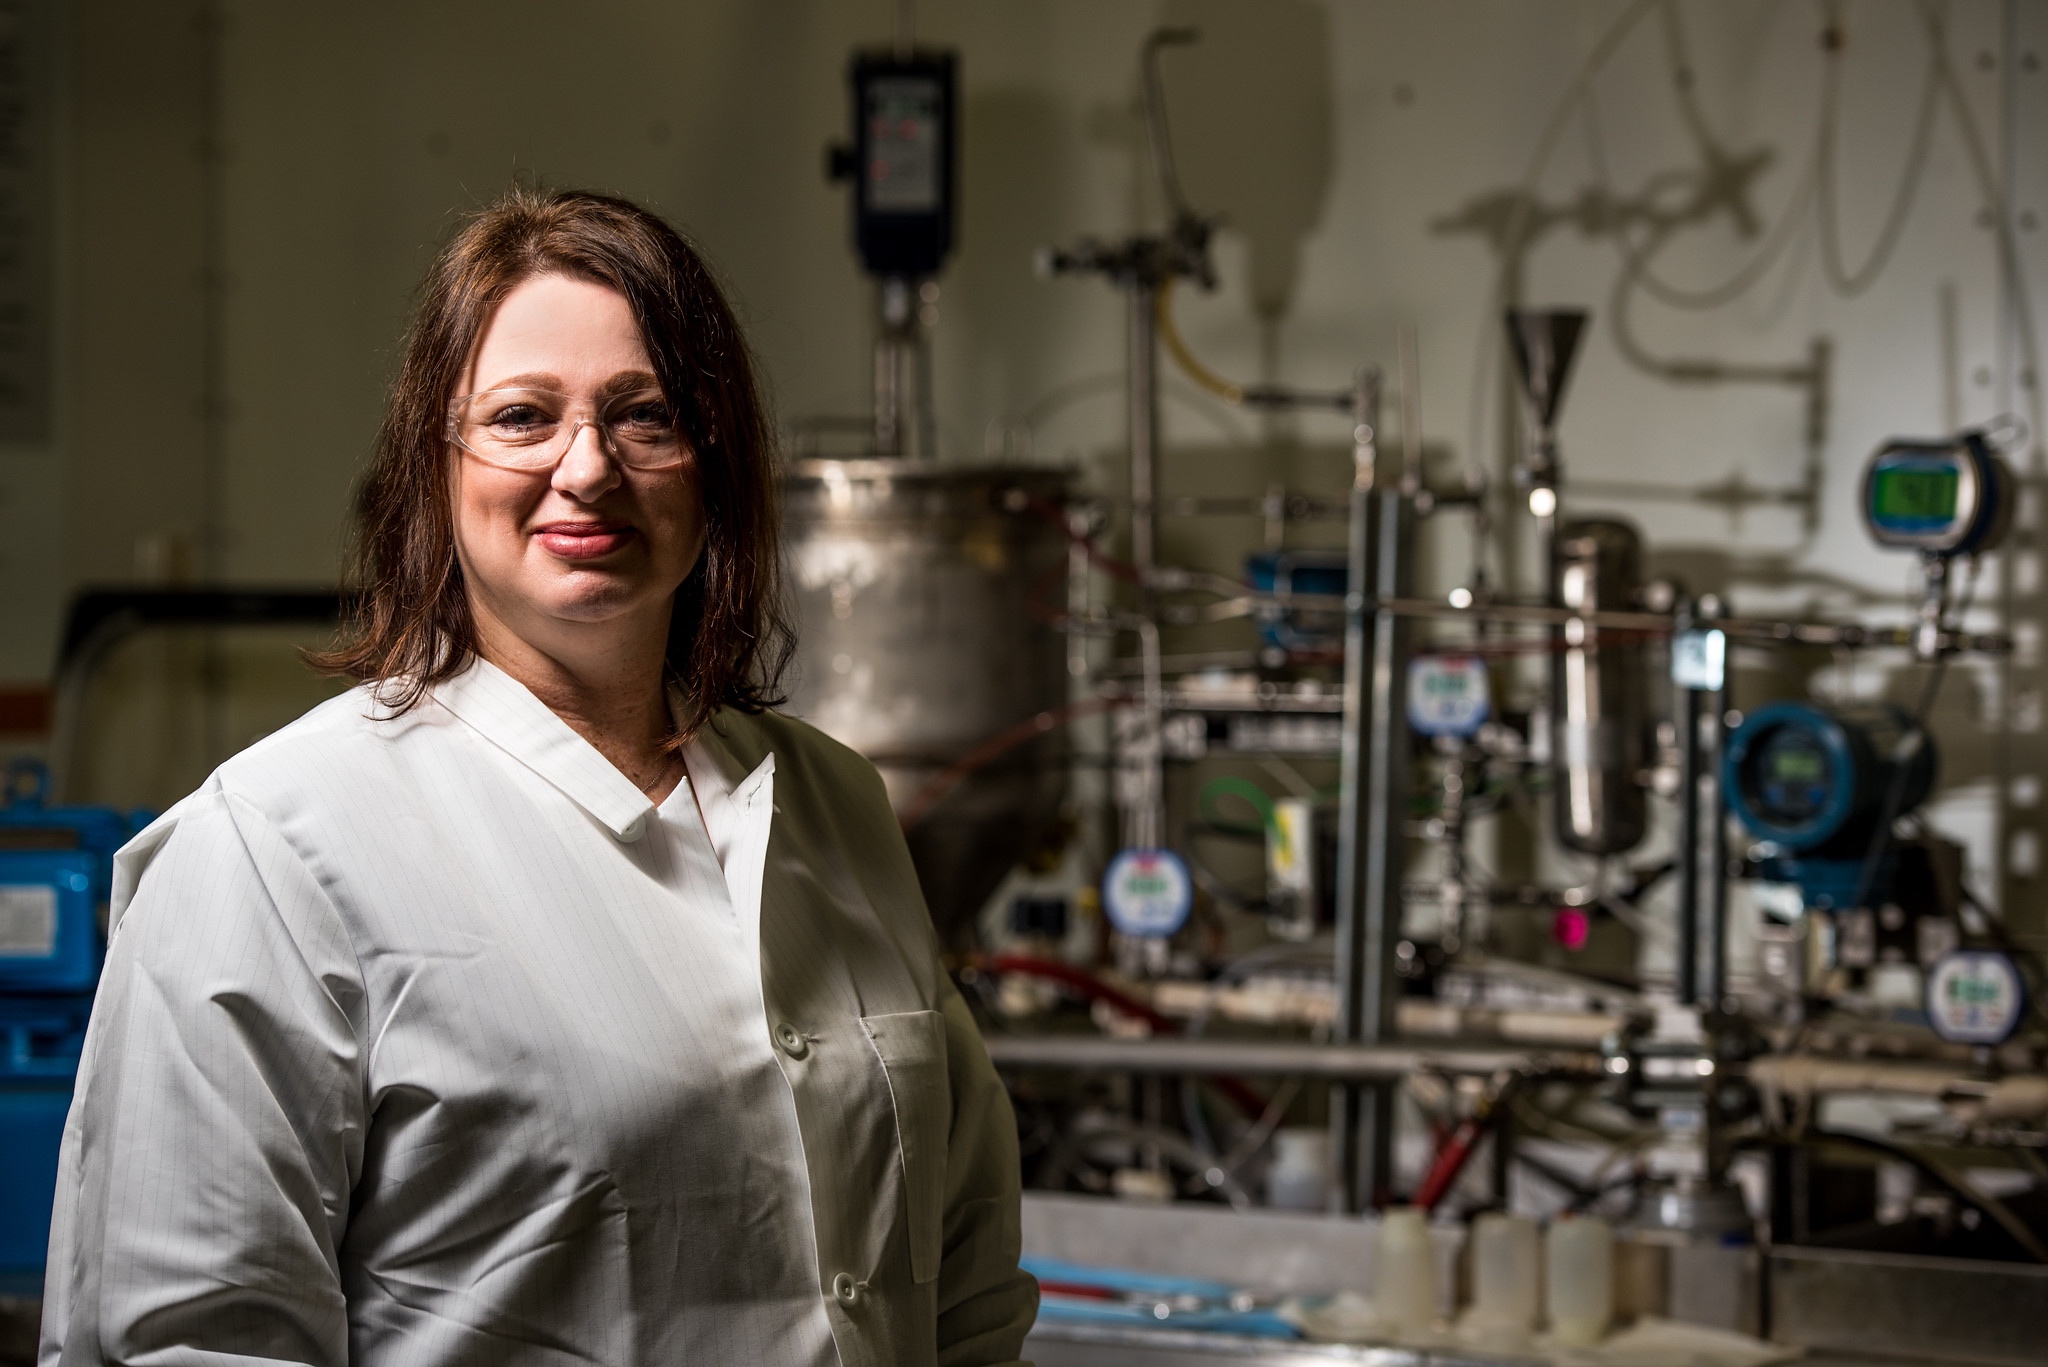 Researcher Carolyn Burns stands next to a laboratory set up of pipes used to test the mesofluidic separator